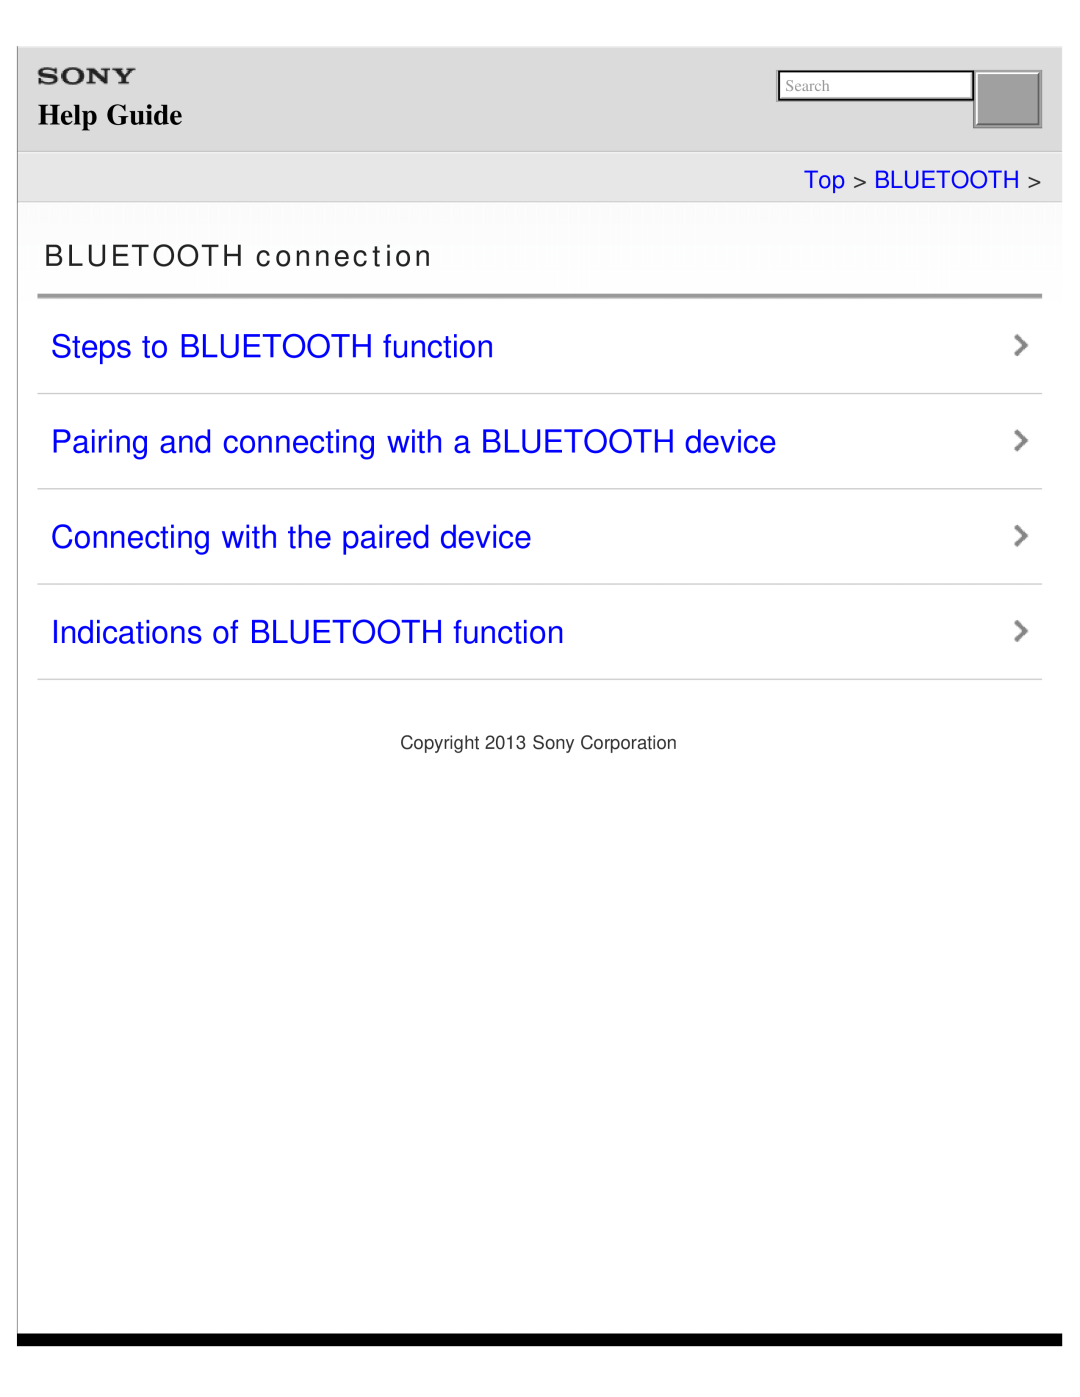 Sony DR-BTN200 Steps to BLUETOOTH function, Pairing and connecting with a BLUETOOTH device, BLUETOOTH connection, Search 